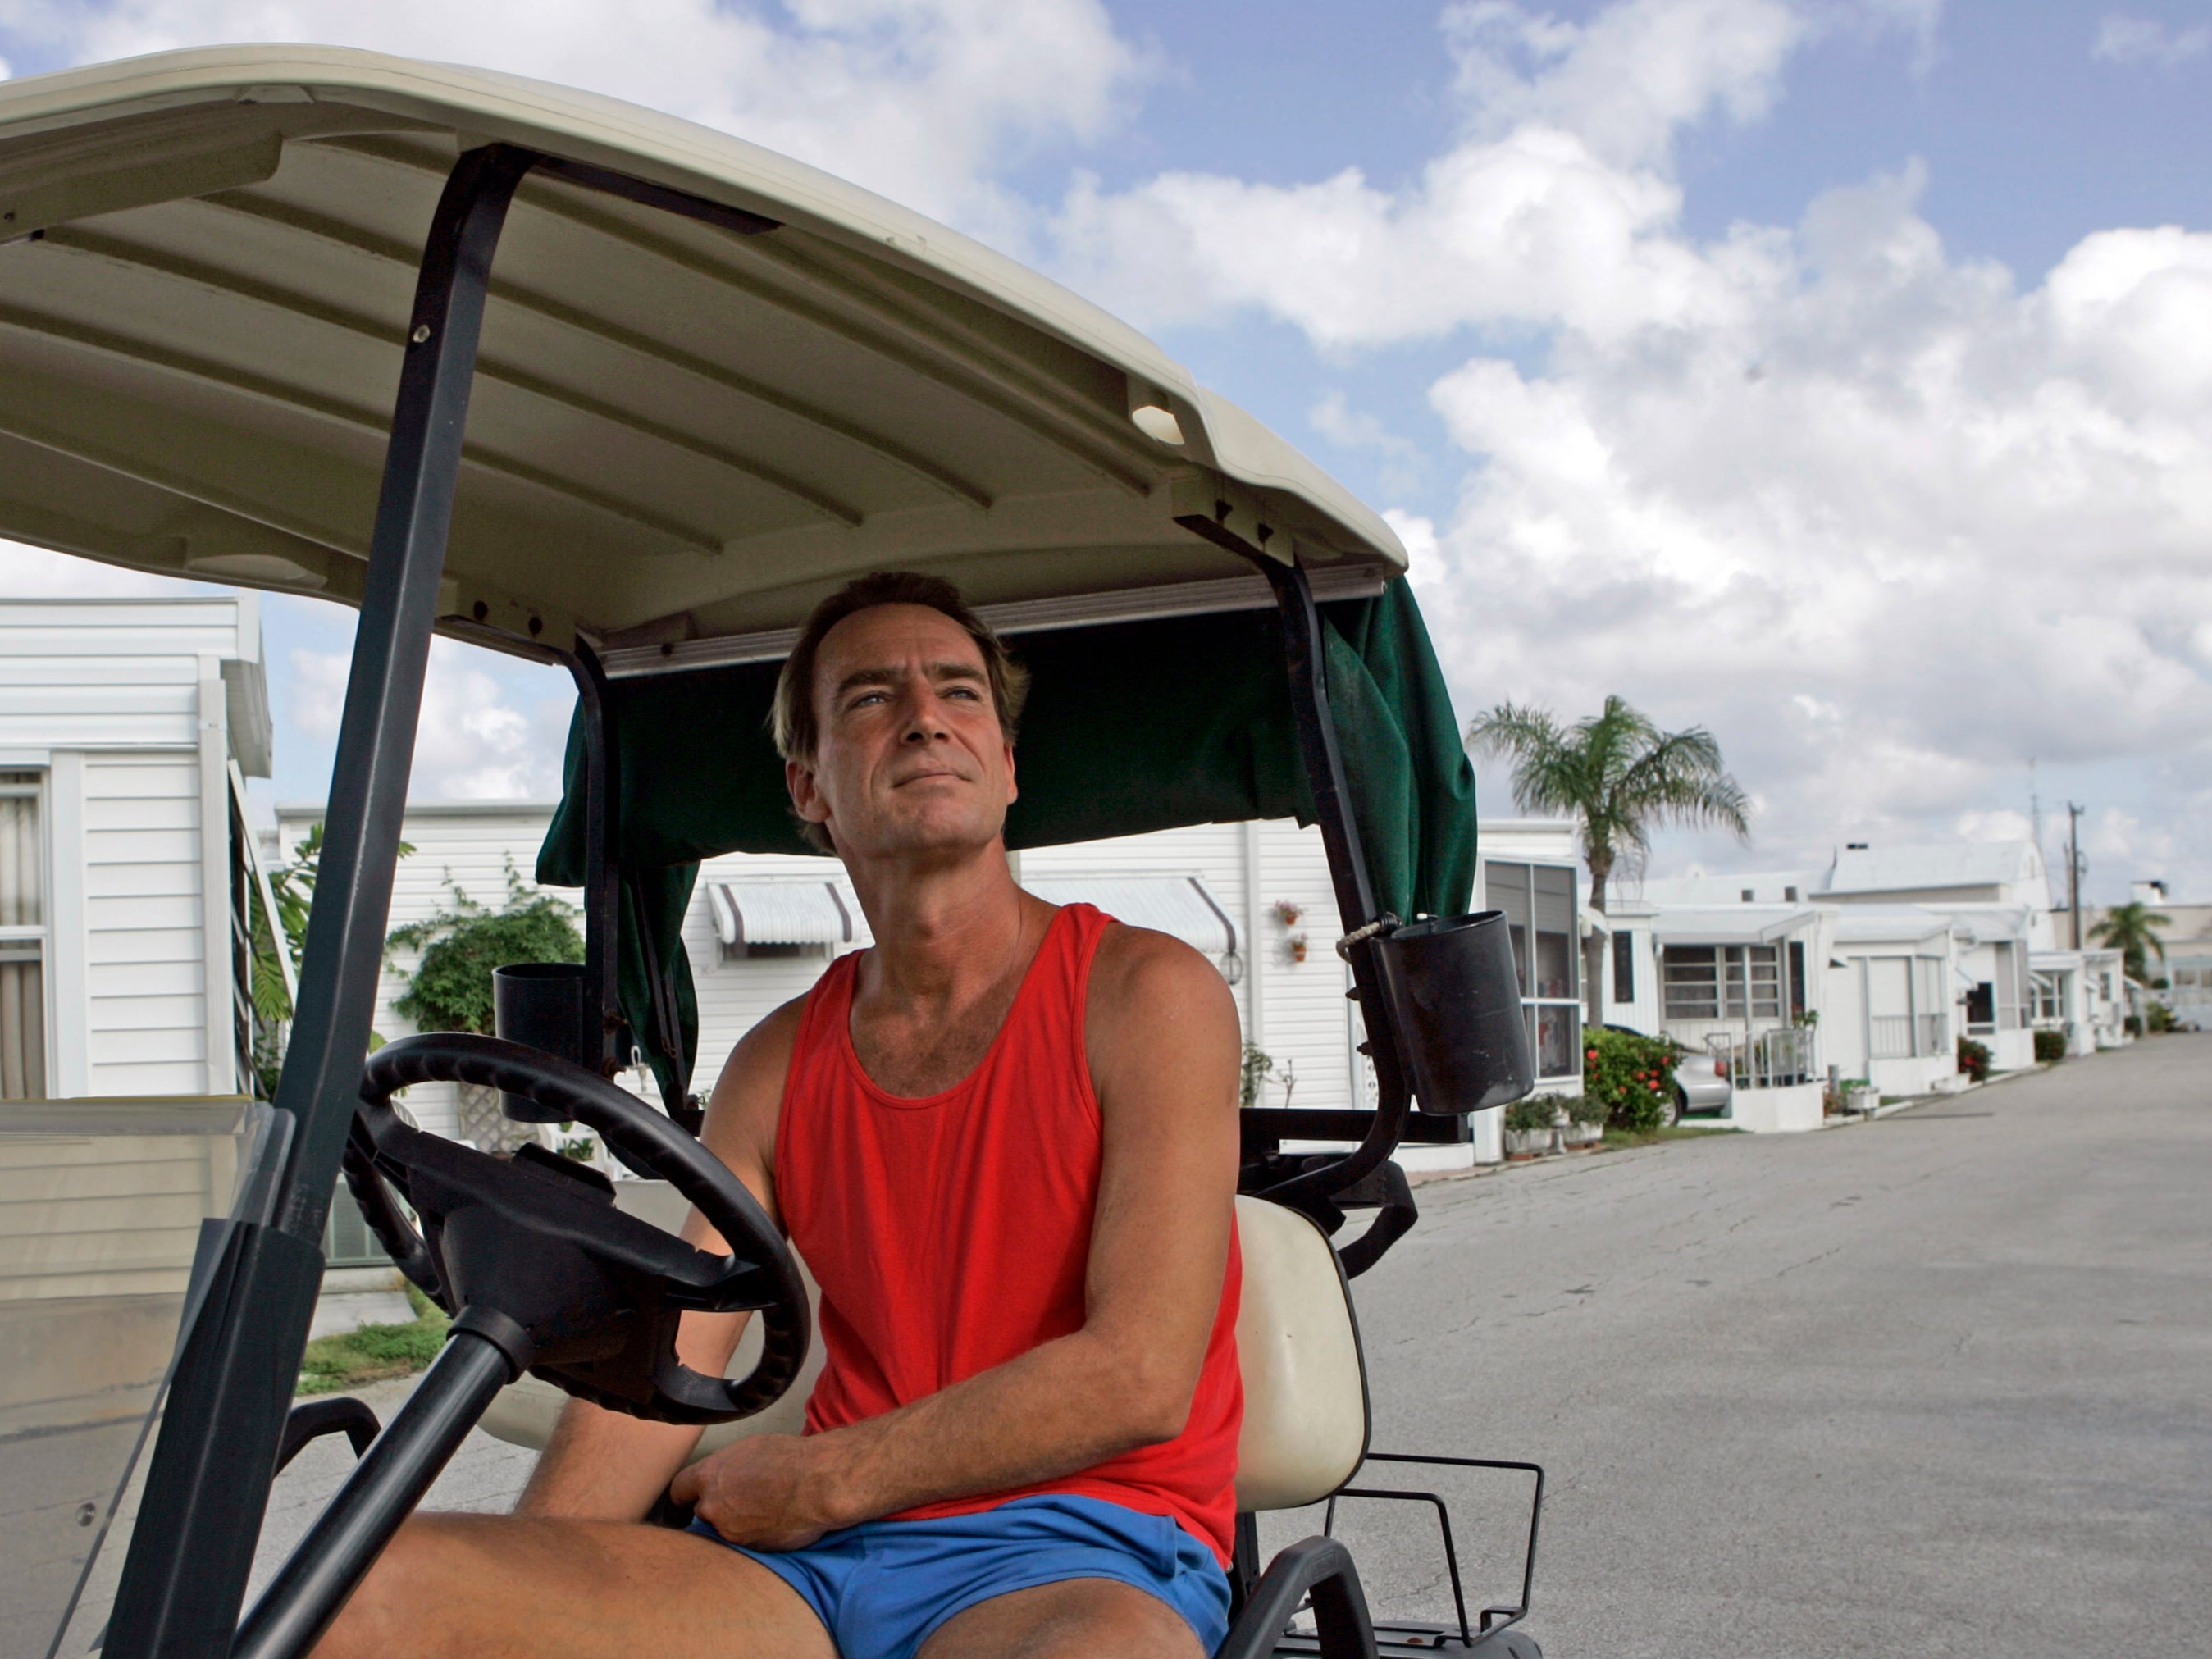 Kevin Dwyer sits in his golf cart at the Briny Breezes trailer park in Briny Breezes, Fla., Monday, Dec. 18, 2006. If residents approved the sale of the community to a developer for more than a half billion dollars, nearly each trailer owner would have become an instant millionaire. "I've nickeled and dimed my whole life. I hit the lottery." Dwyer, who paid just $37,500 for his trailer nine years ago, would make about $800,000. (AP Photo/Alan Diaz)